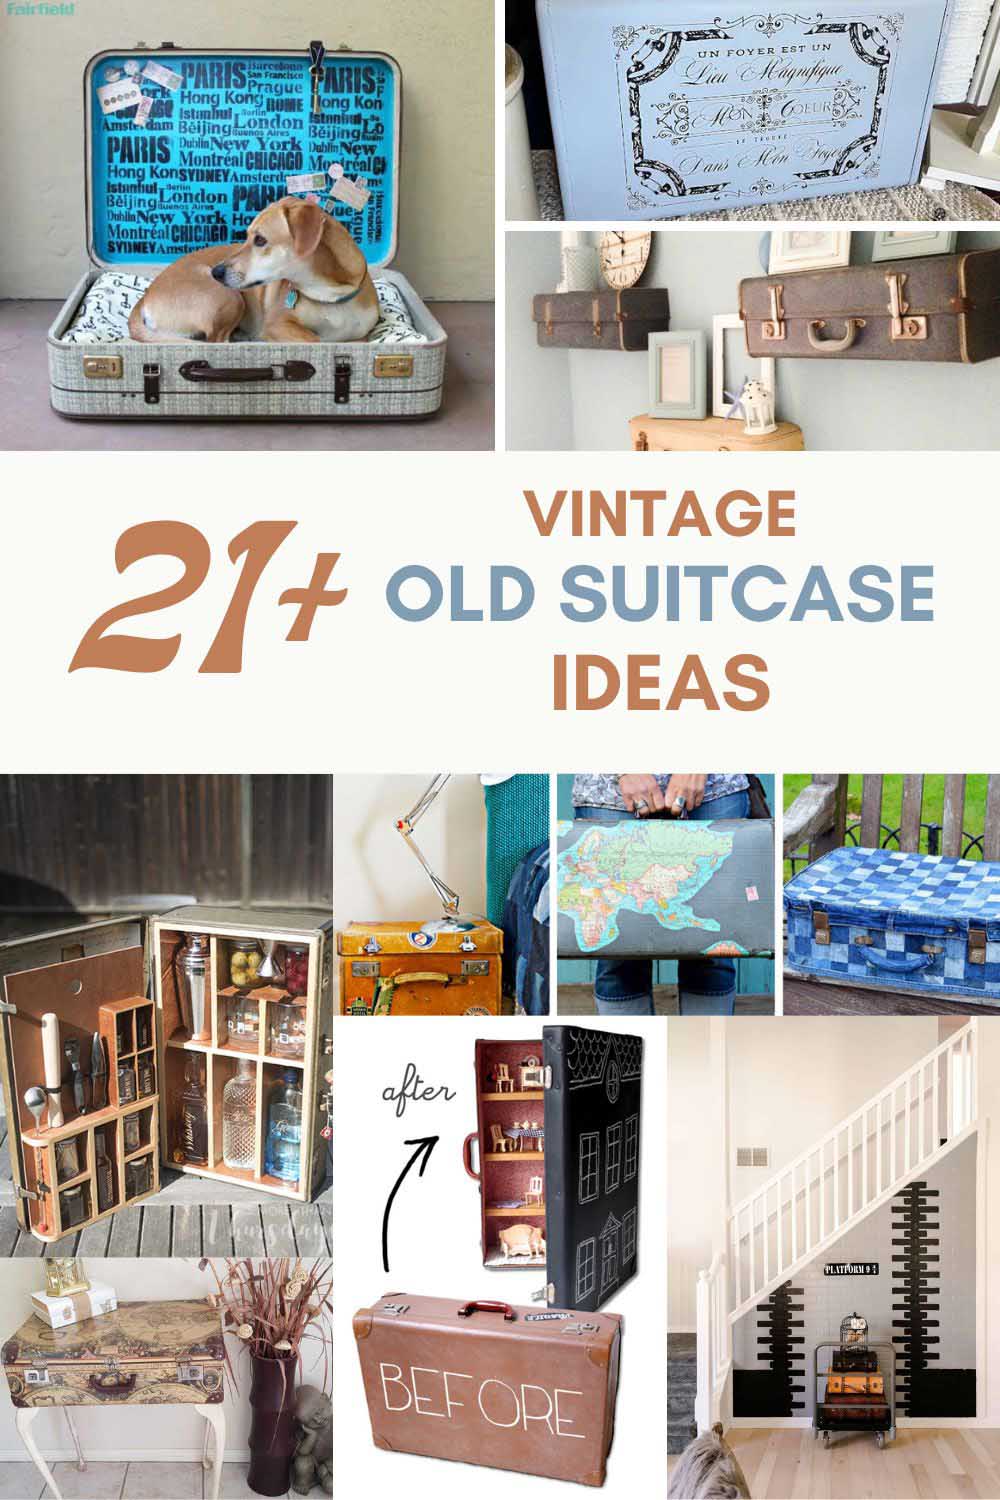 21 vintage old suitcase ideas and decorating with suitcase ideas